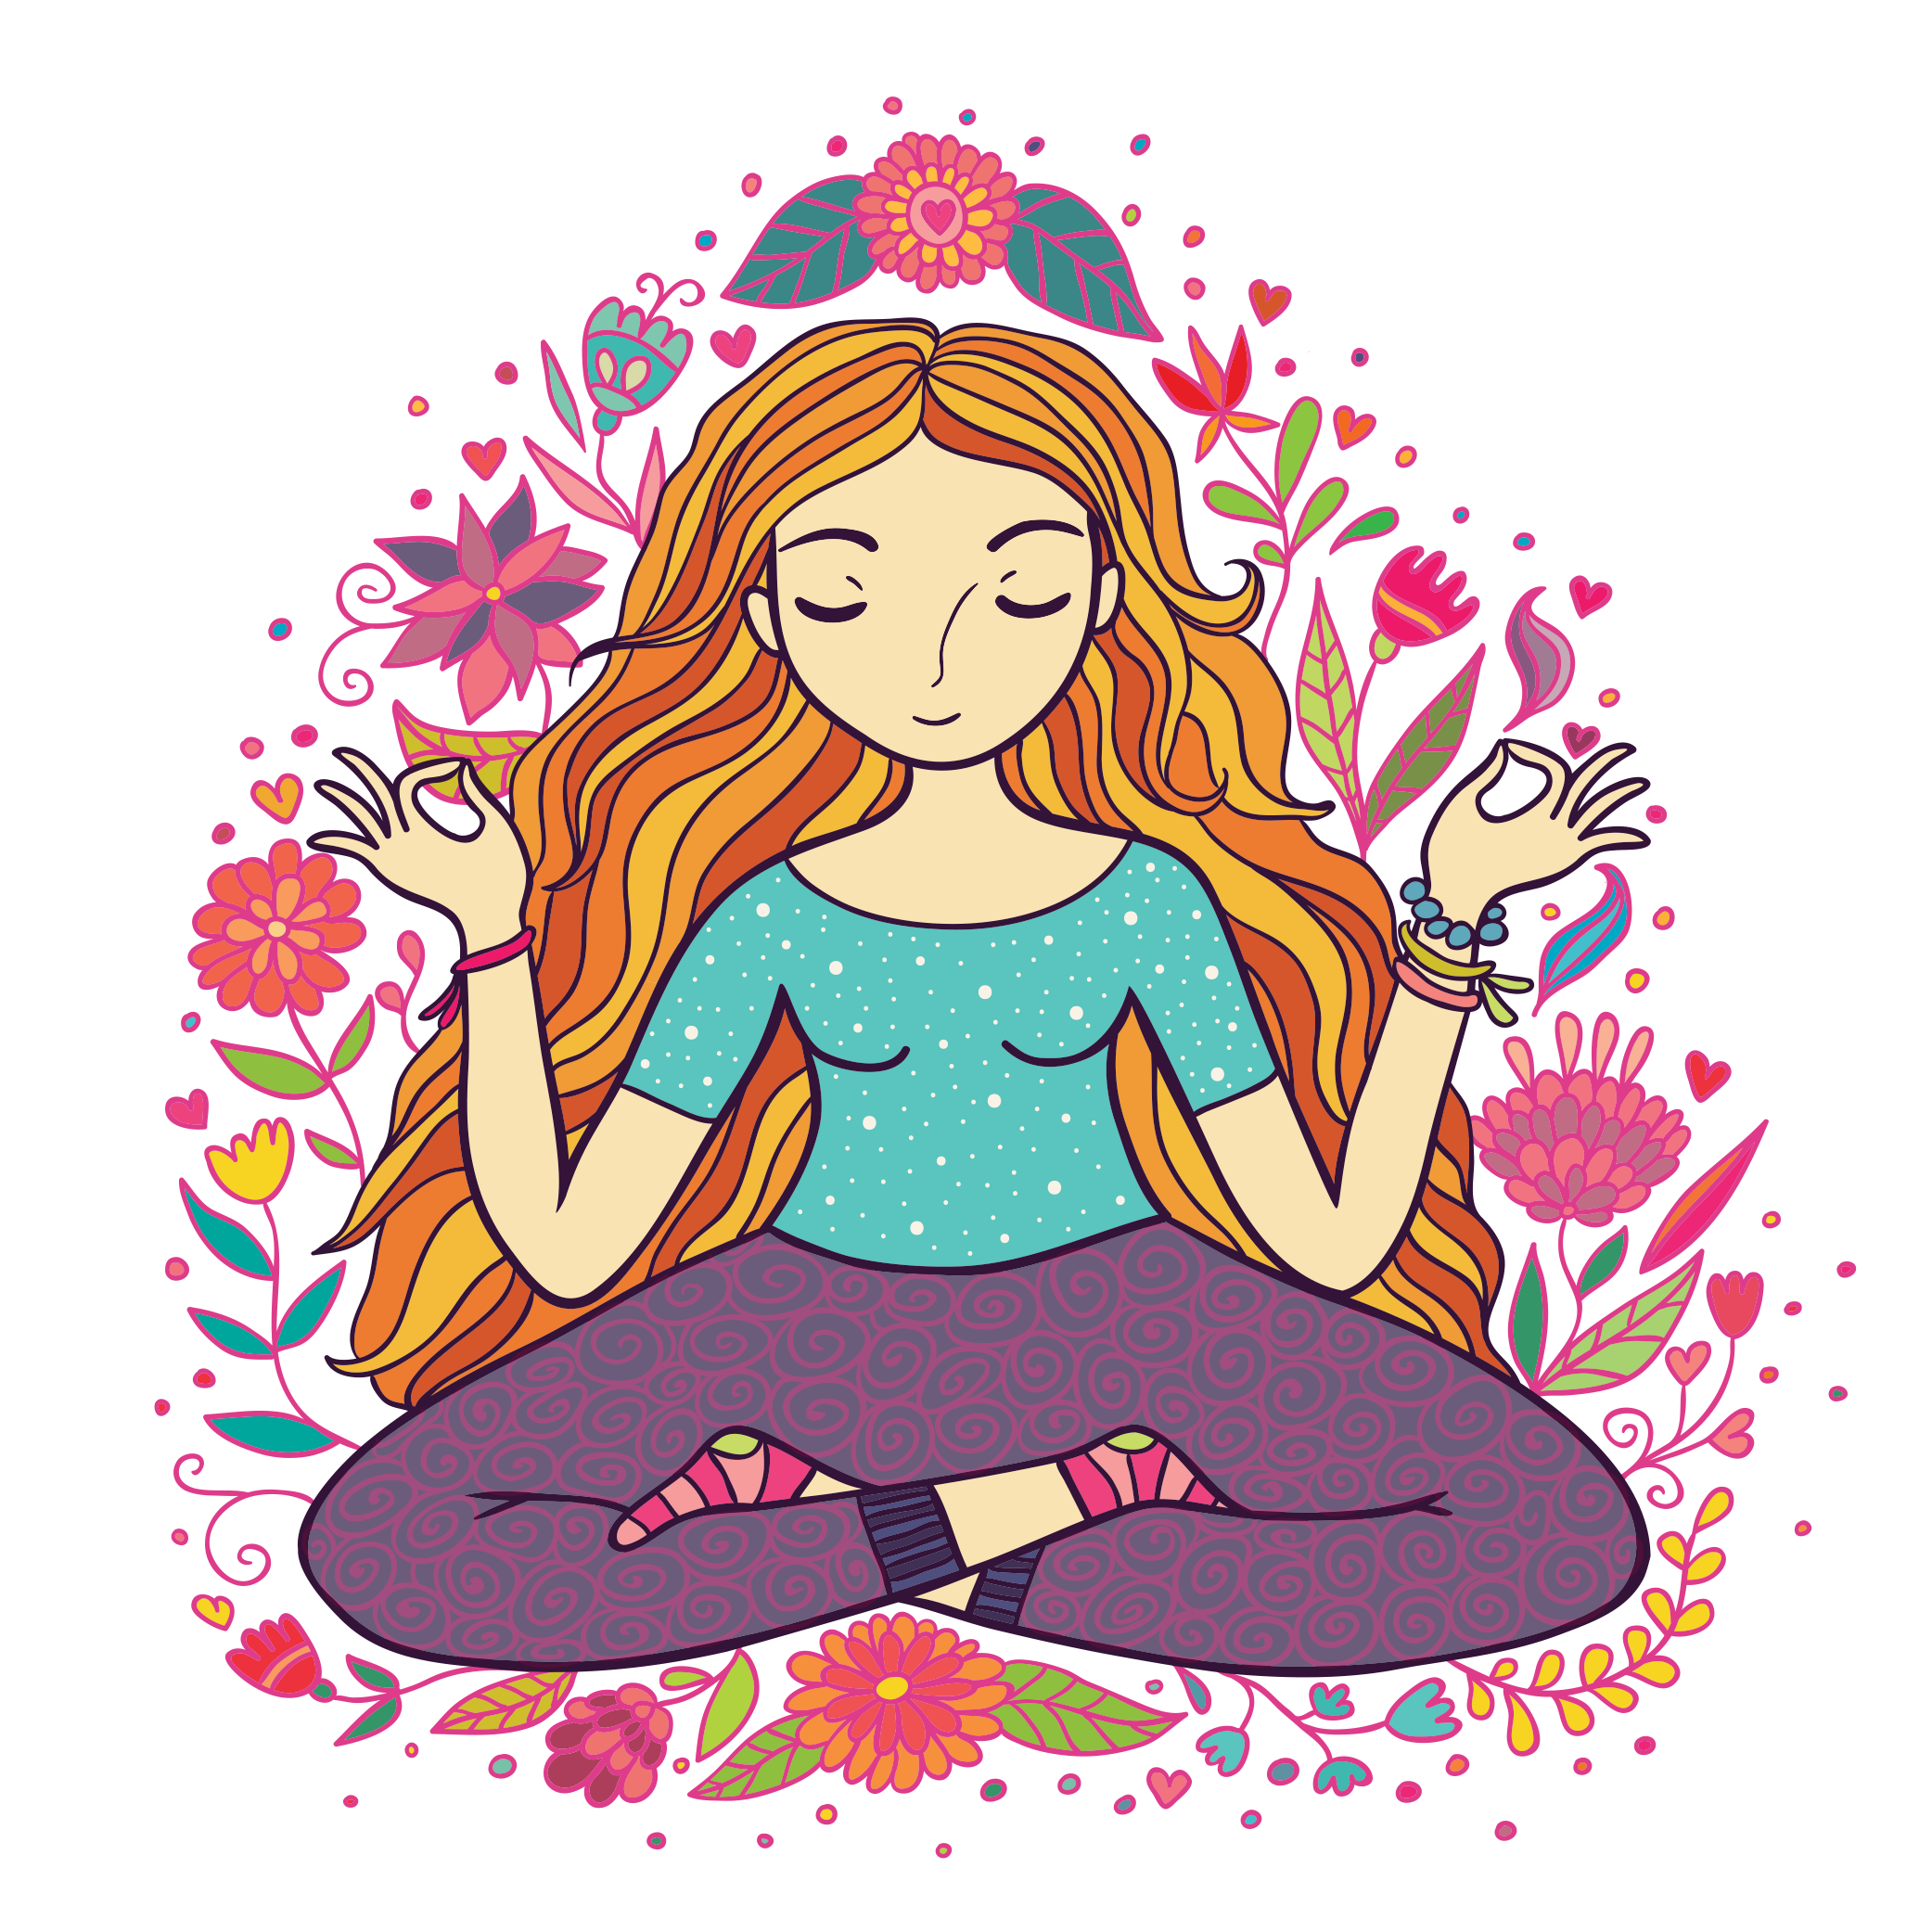 Breathing clipart calm breathing, Breathing calm breathing Transparent ...